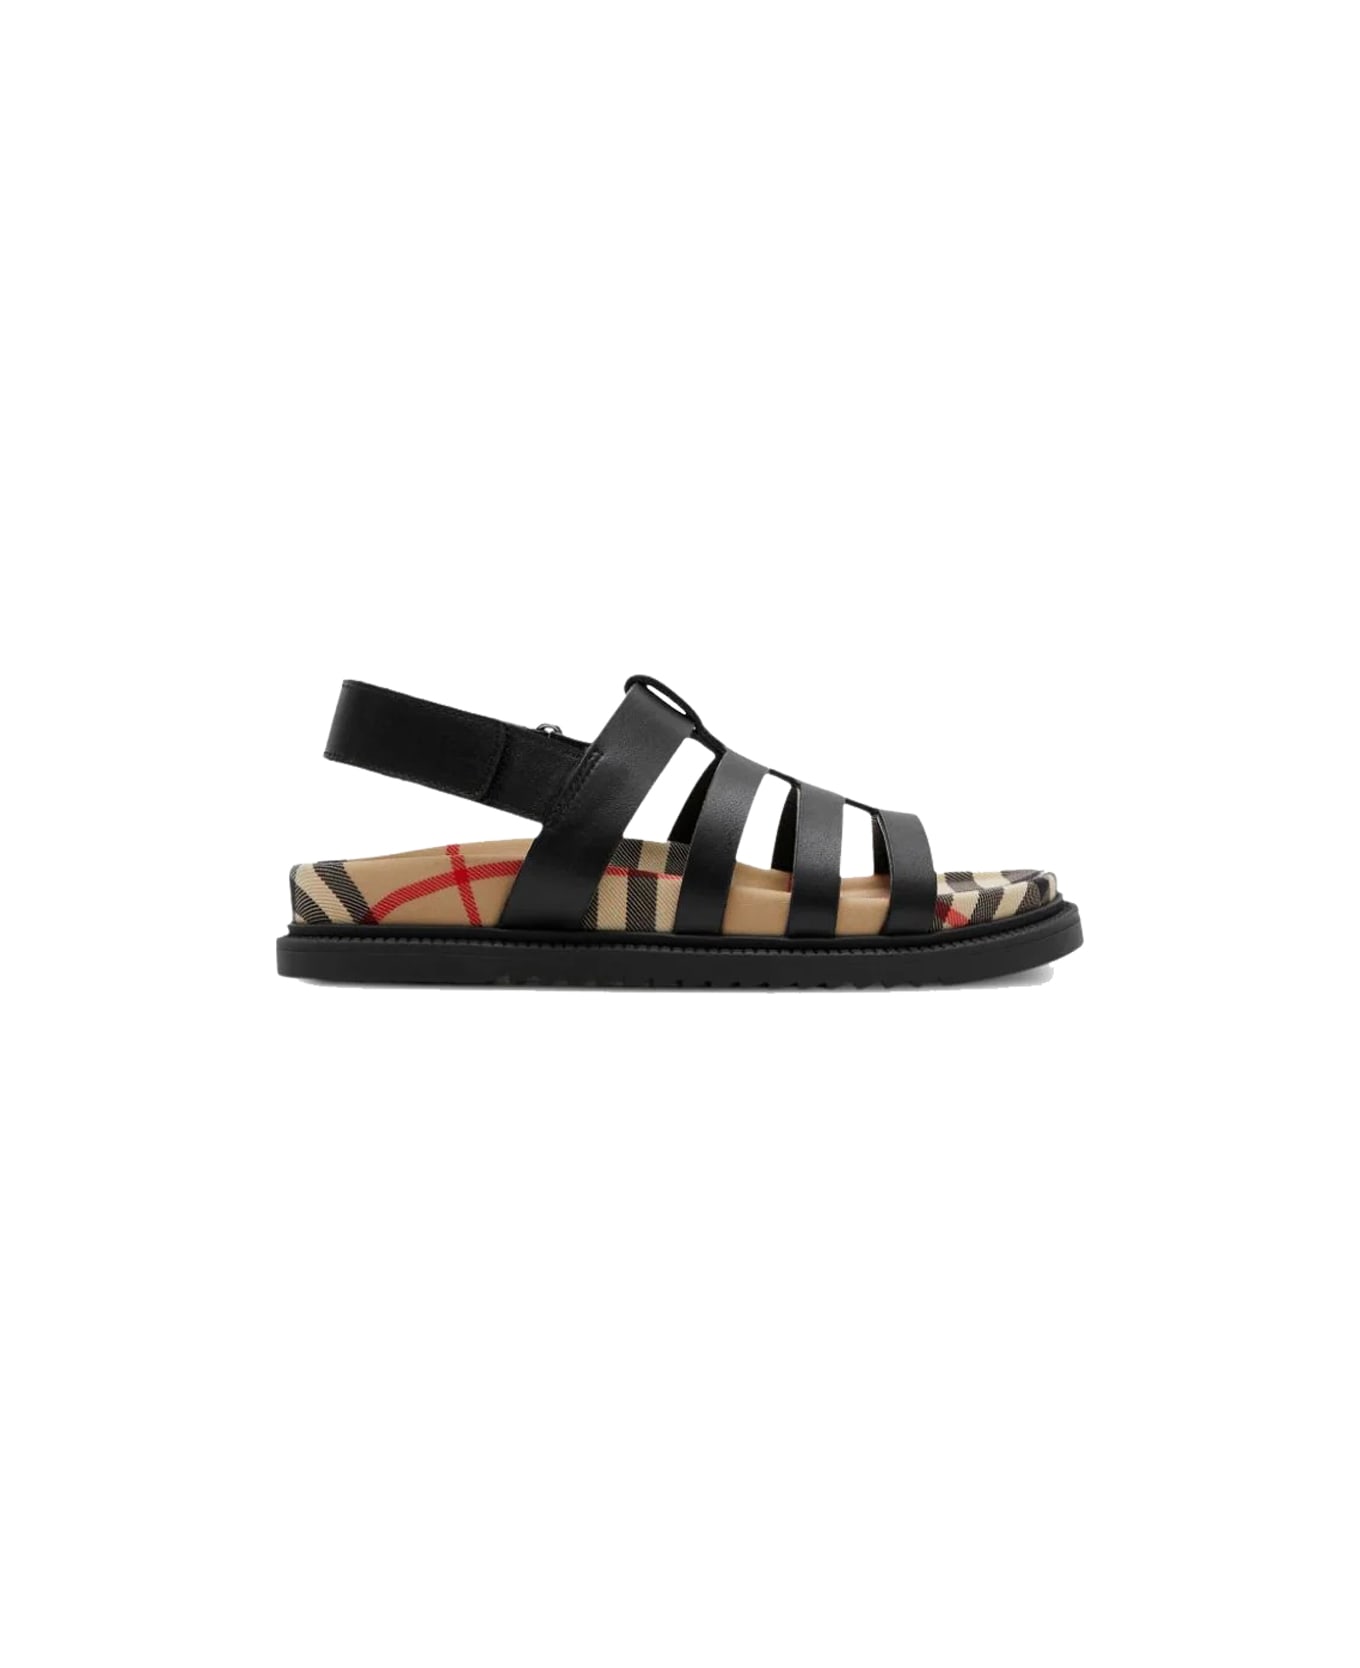 Burberry Leather Sandals - Back